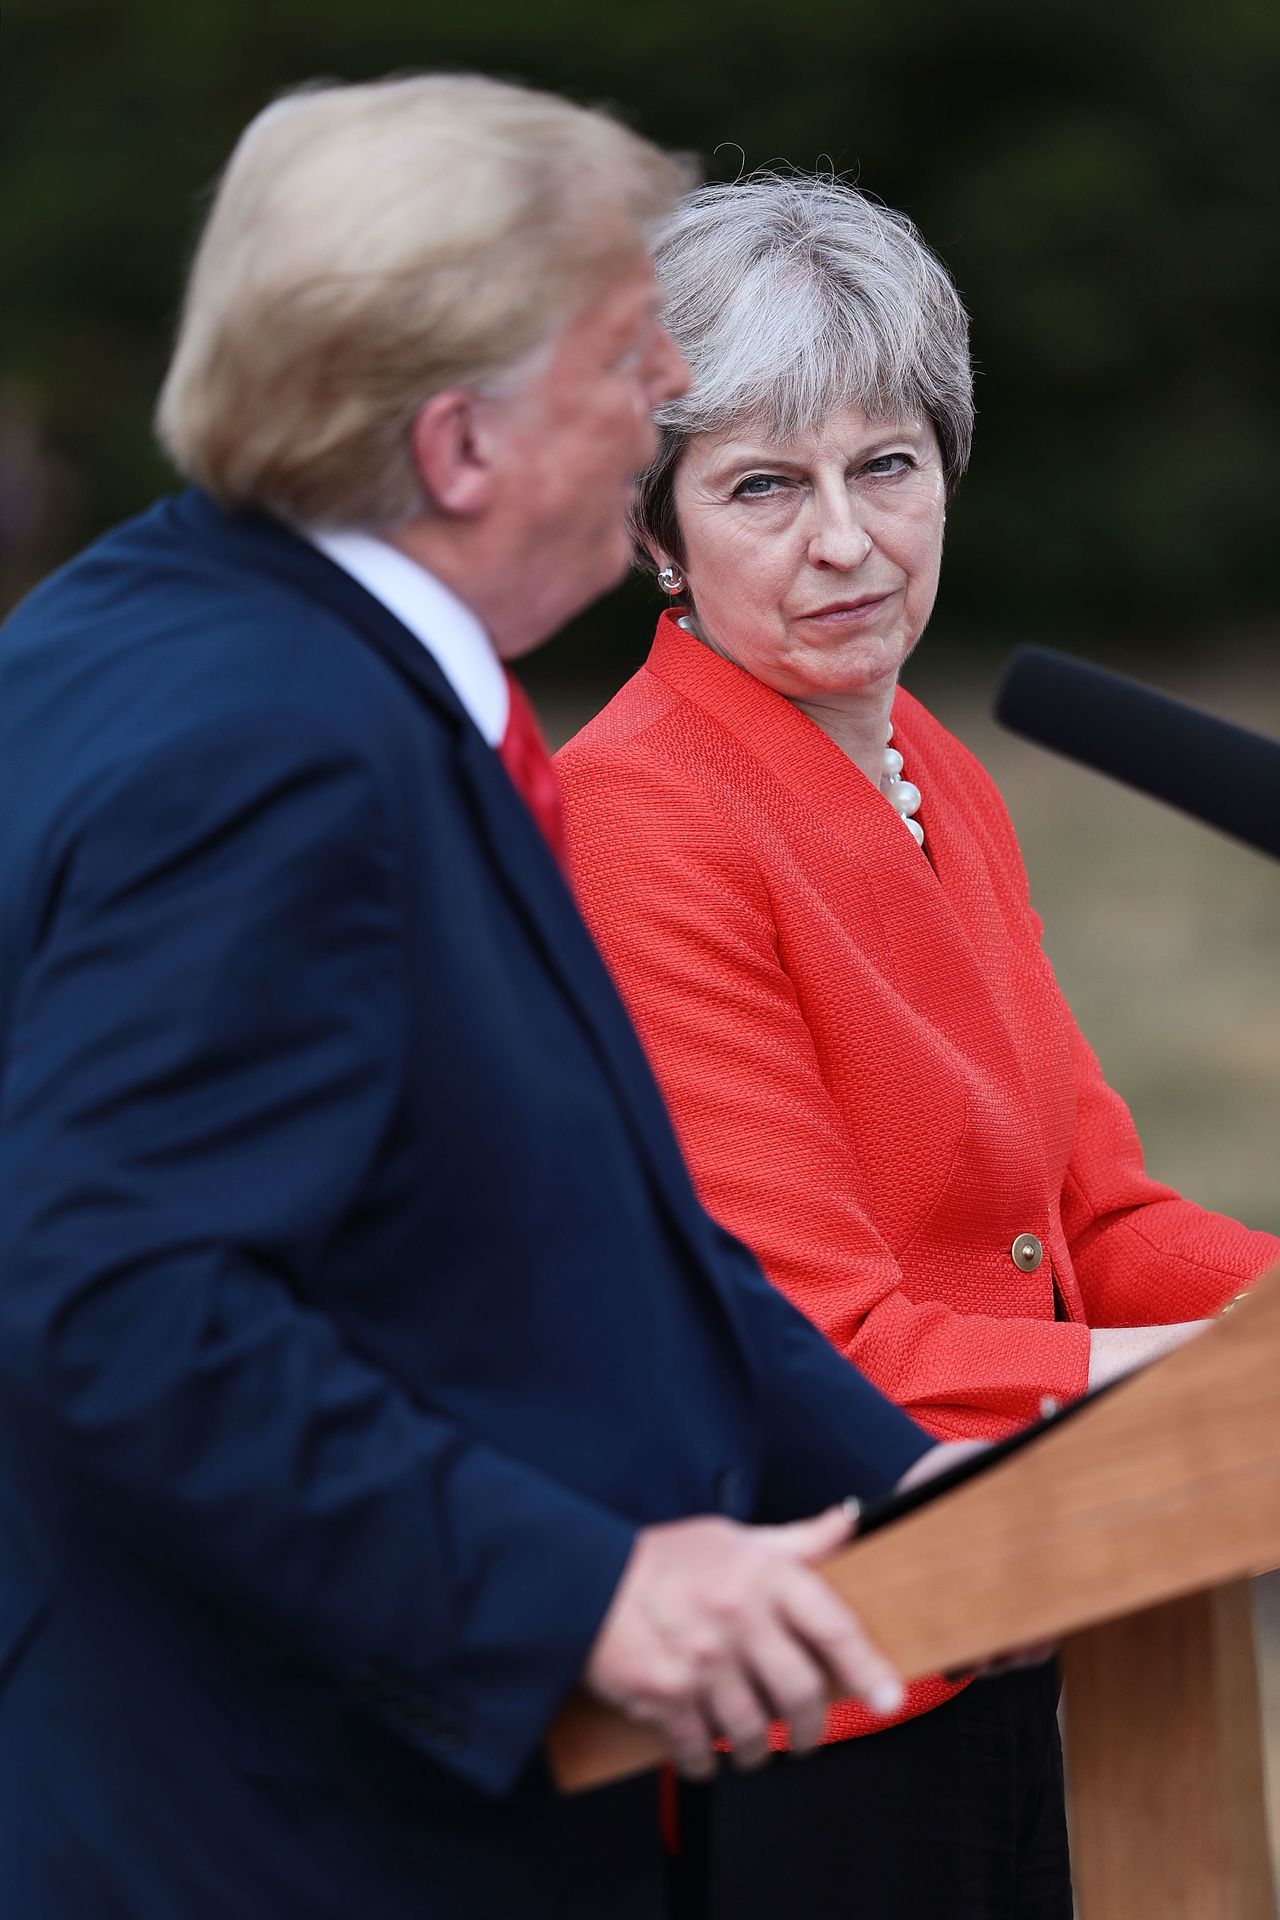 May listens as Trump addresses the press. 